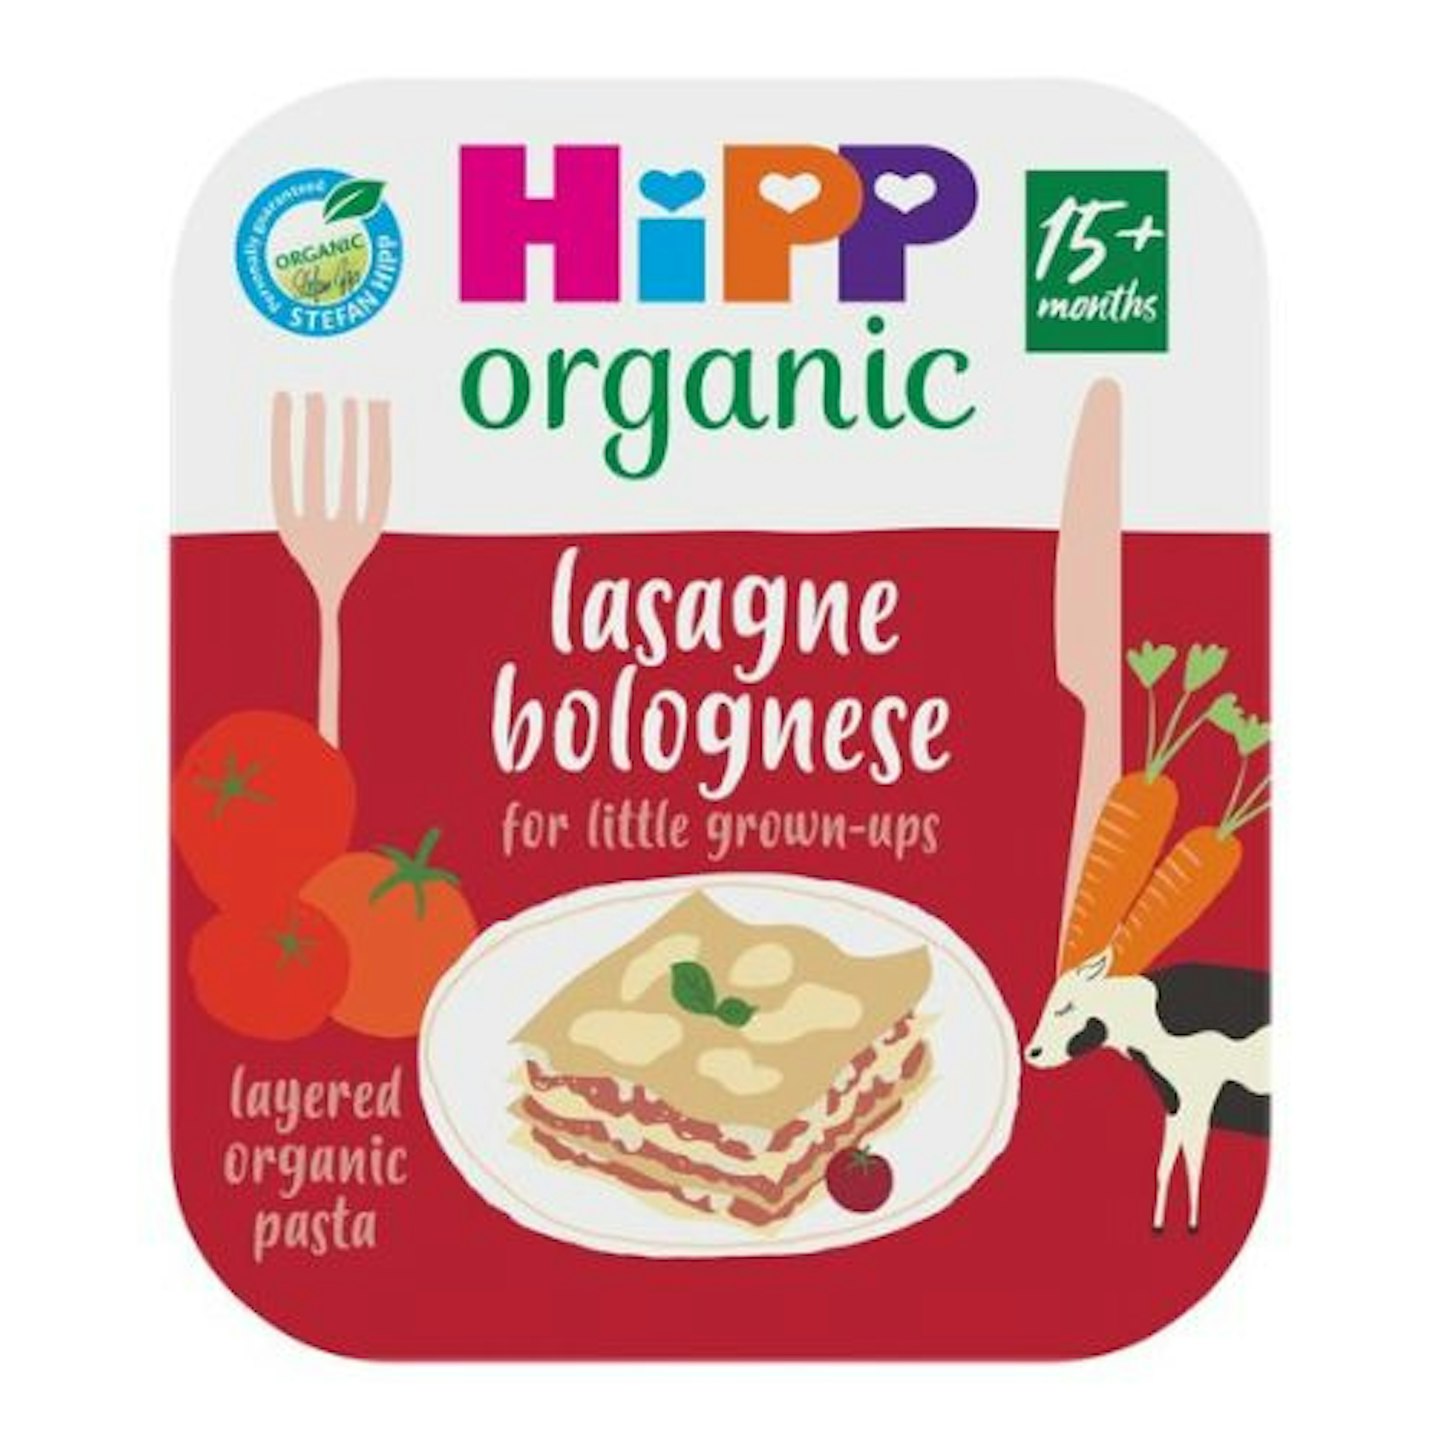 Hipp Organic Lasagne Bolognese Meal 15+ Months Meal